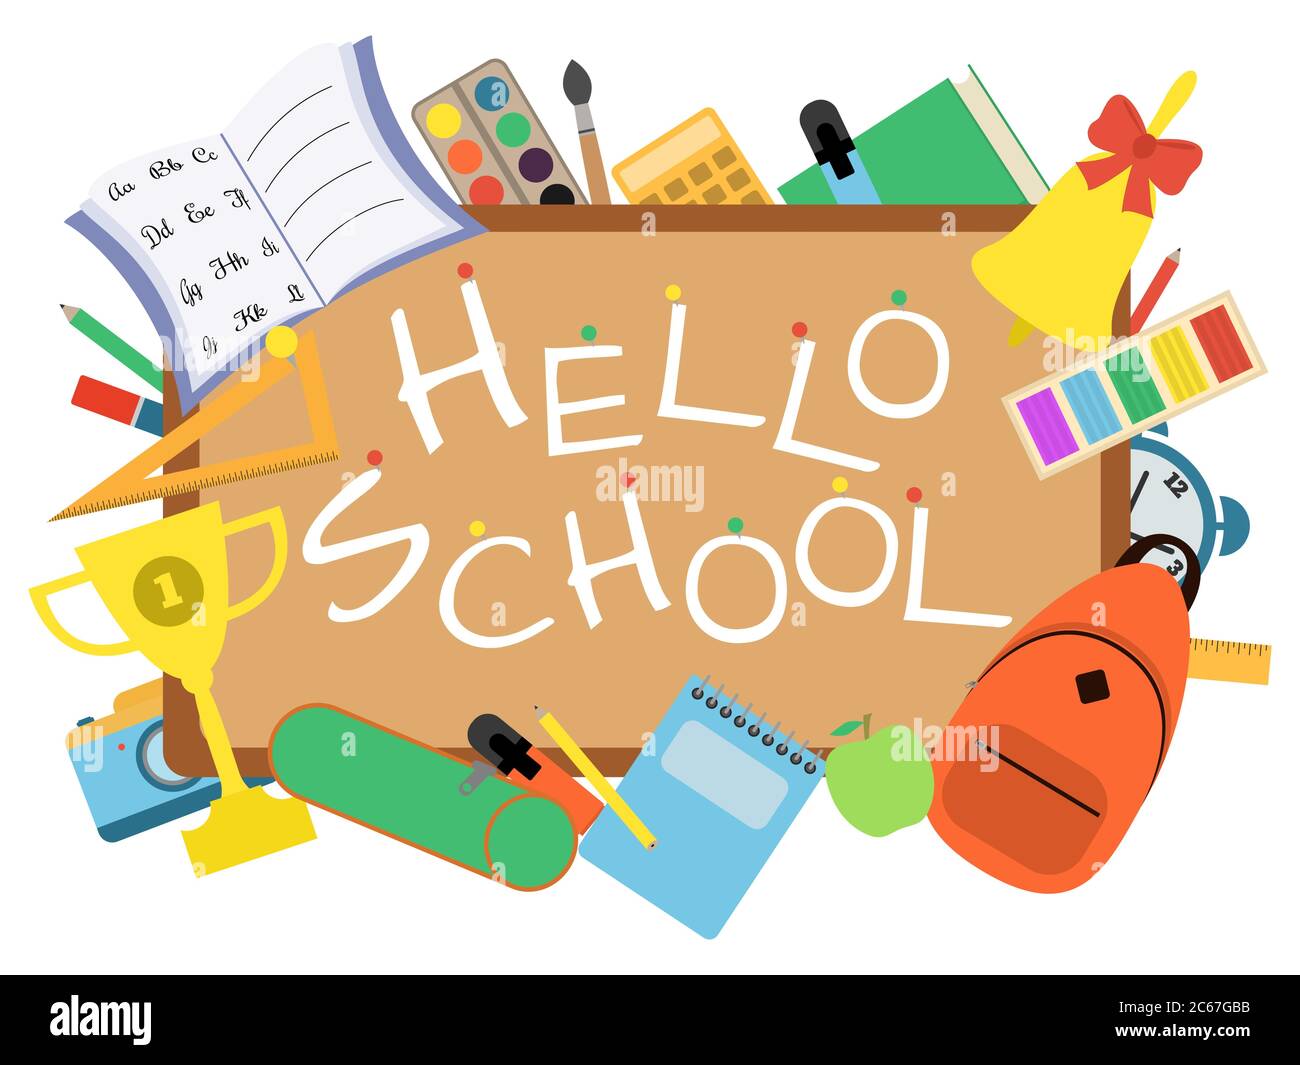 Hello school banner with blackboard and student items on white background. Vector Stock Vector